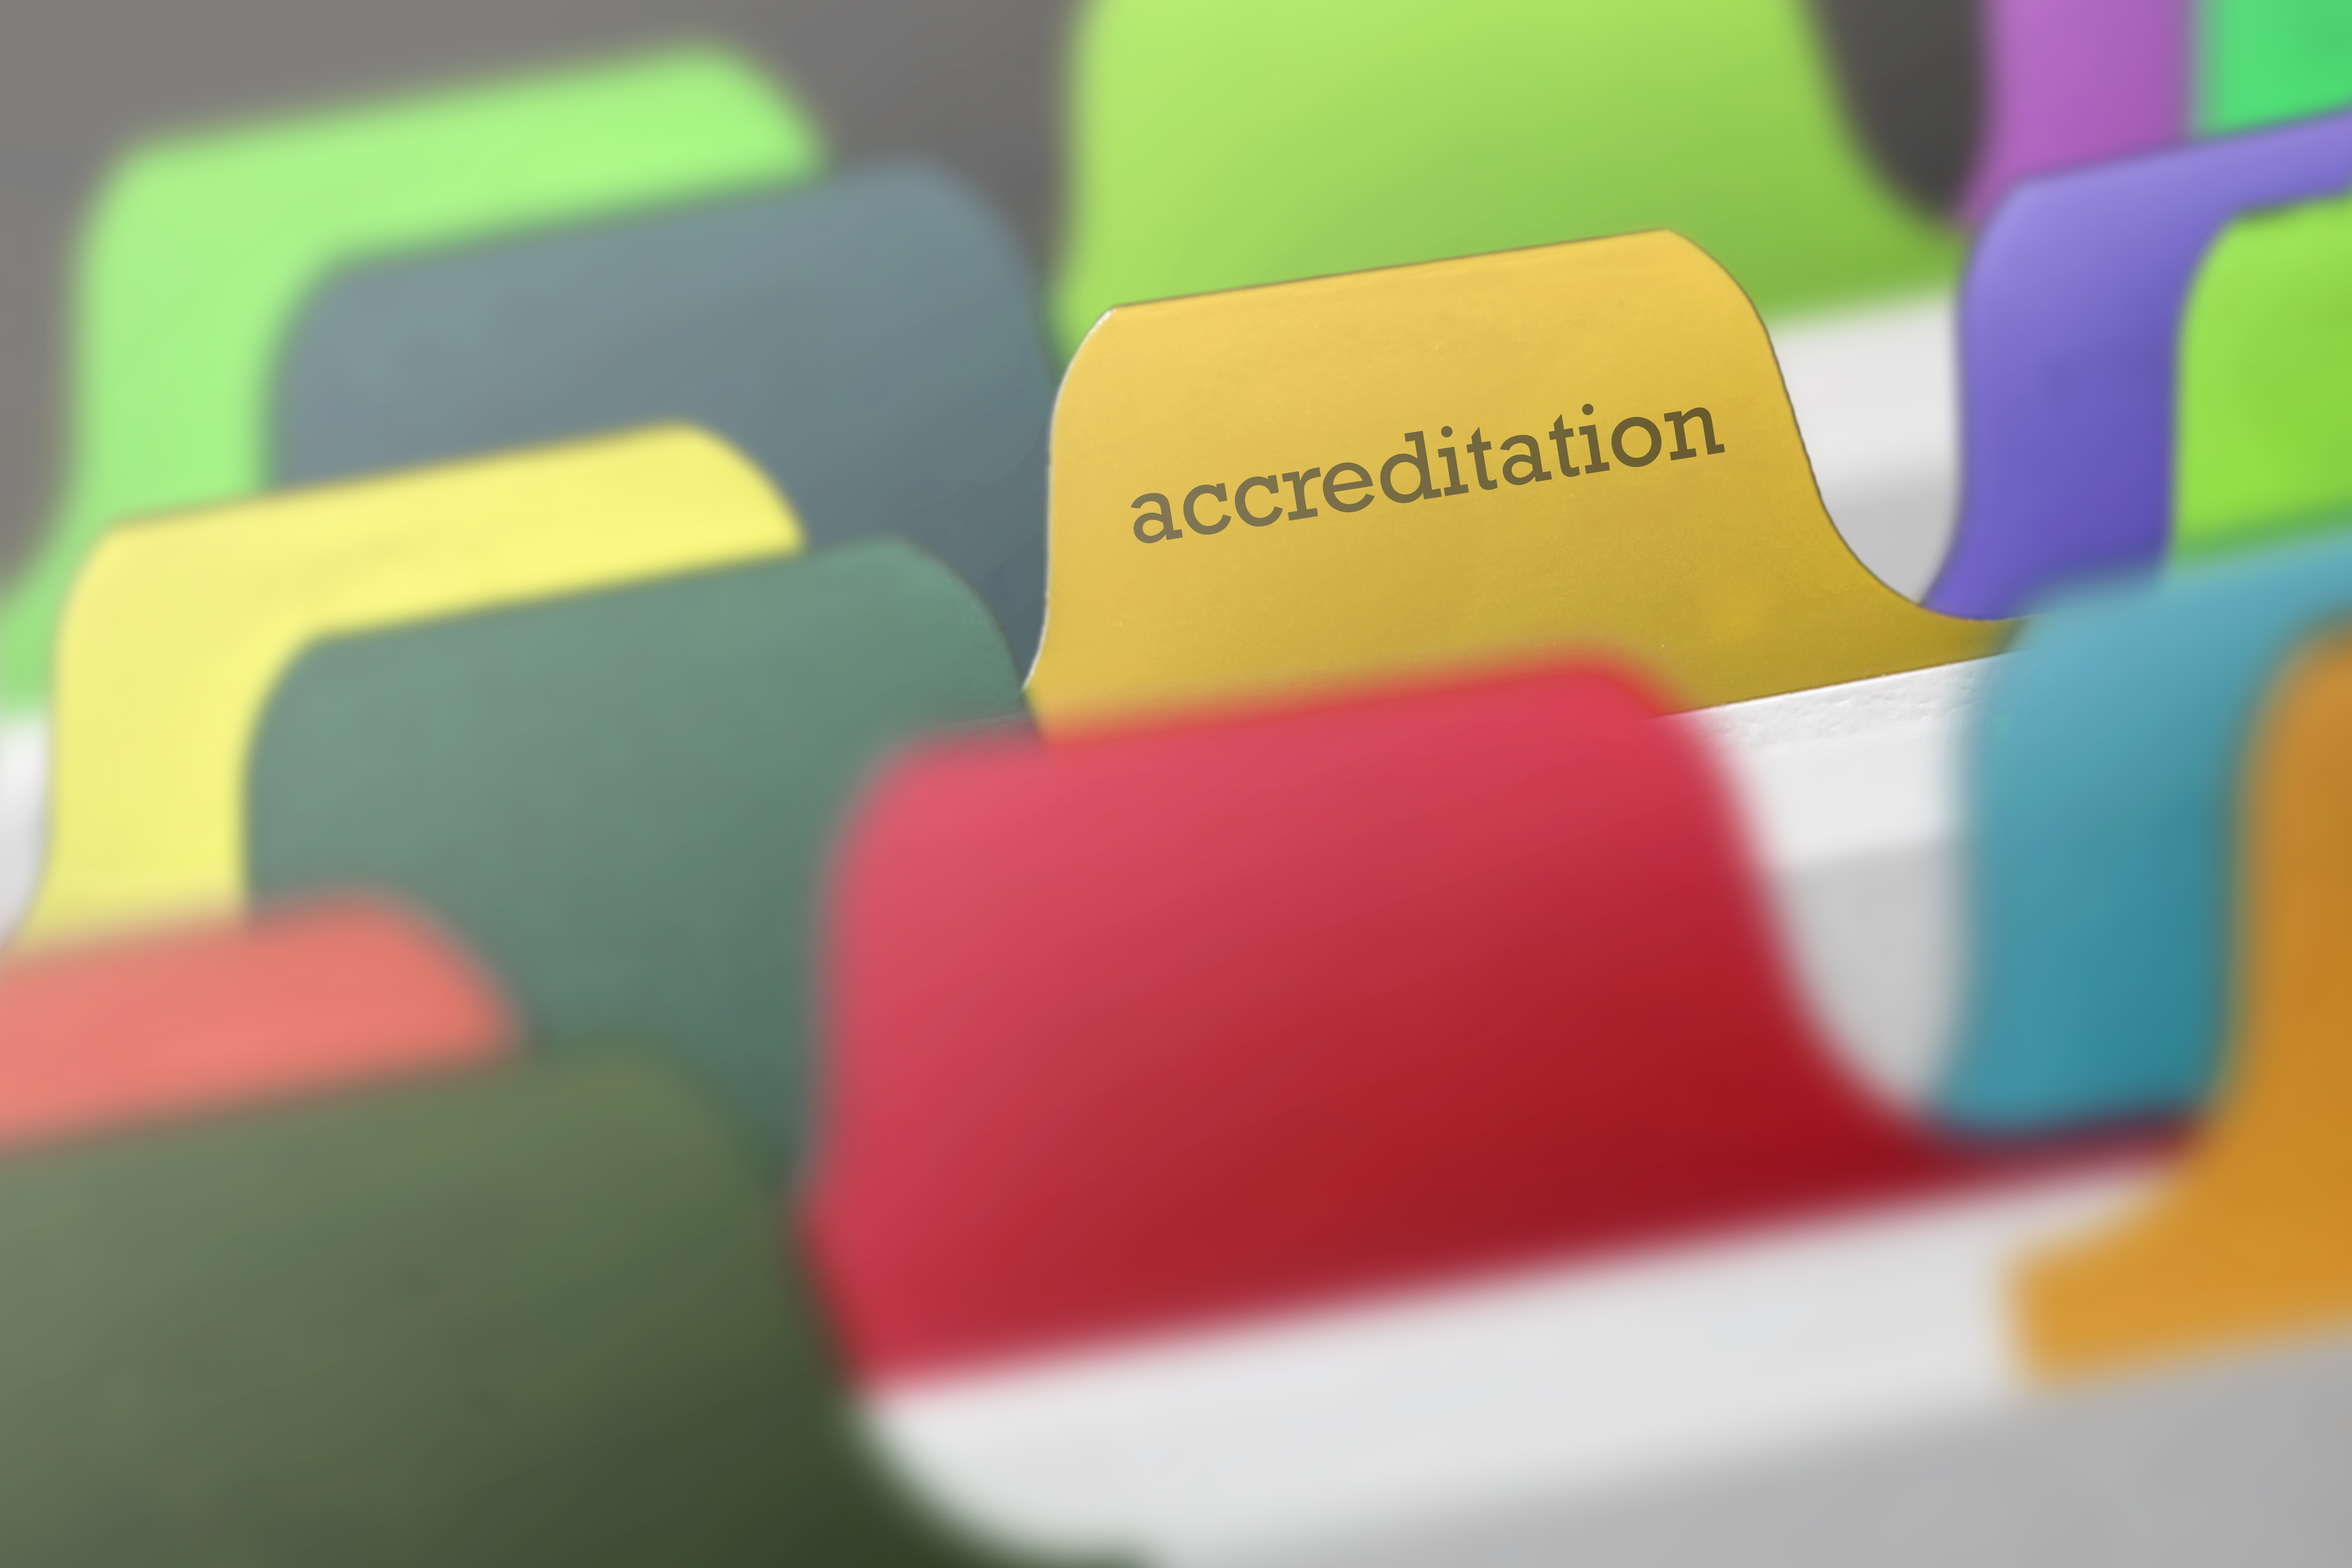 The Role of Accreditation in Achieving the Quadruple Aim